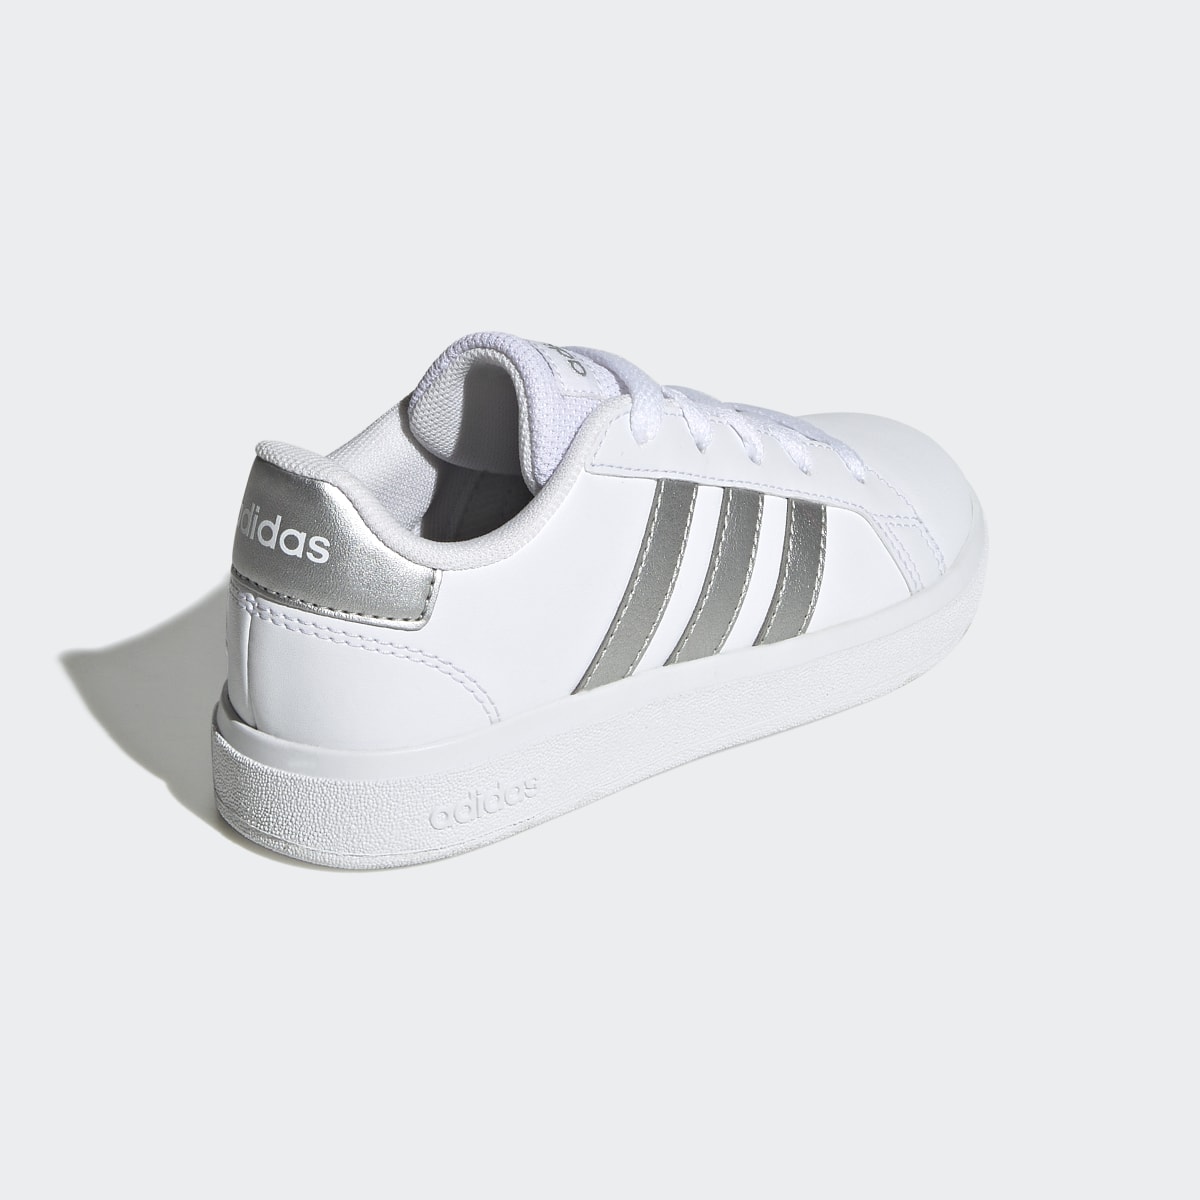 Adidas Grand Court Lifestyle Tennis Lace-Up Schuh. 6